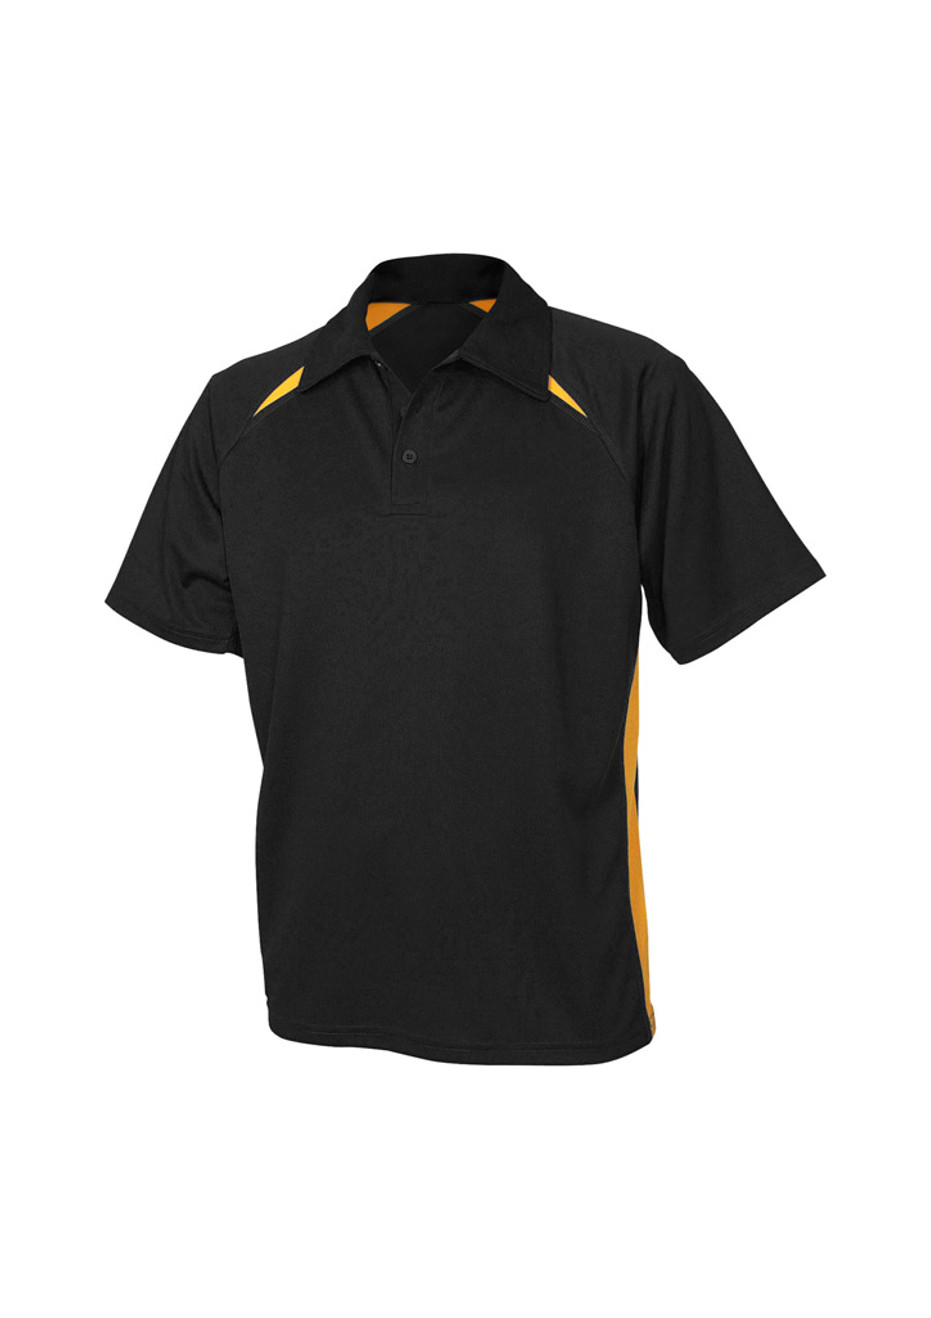 Biz Collection P7700 Mens Splice Polo | Available Colours: Red/White, Royal/Gold, Forest/Gold, Navy/Red, Navy/Gold, Navy/White, SpringBlue/Navy, Black/White, Black/Gold, White/Navy, Black/Red, Royal/White, Black/Orange